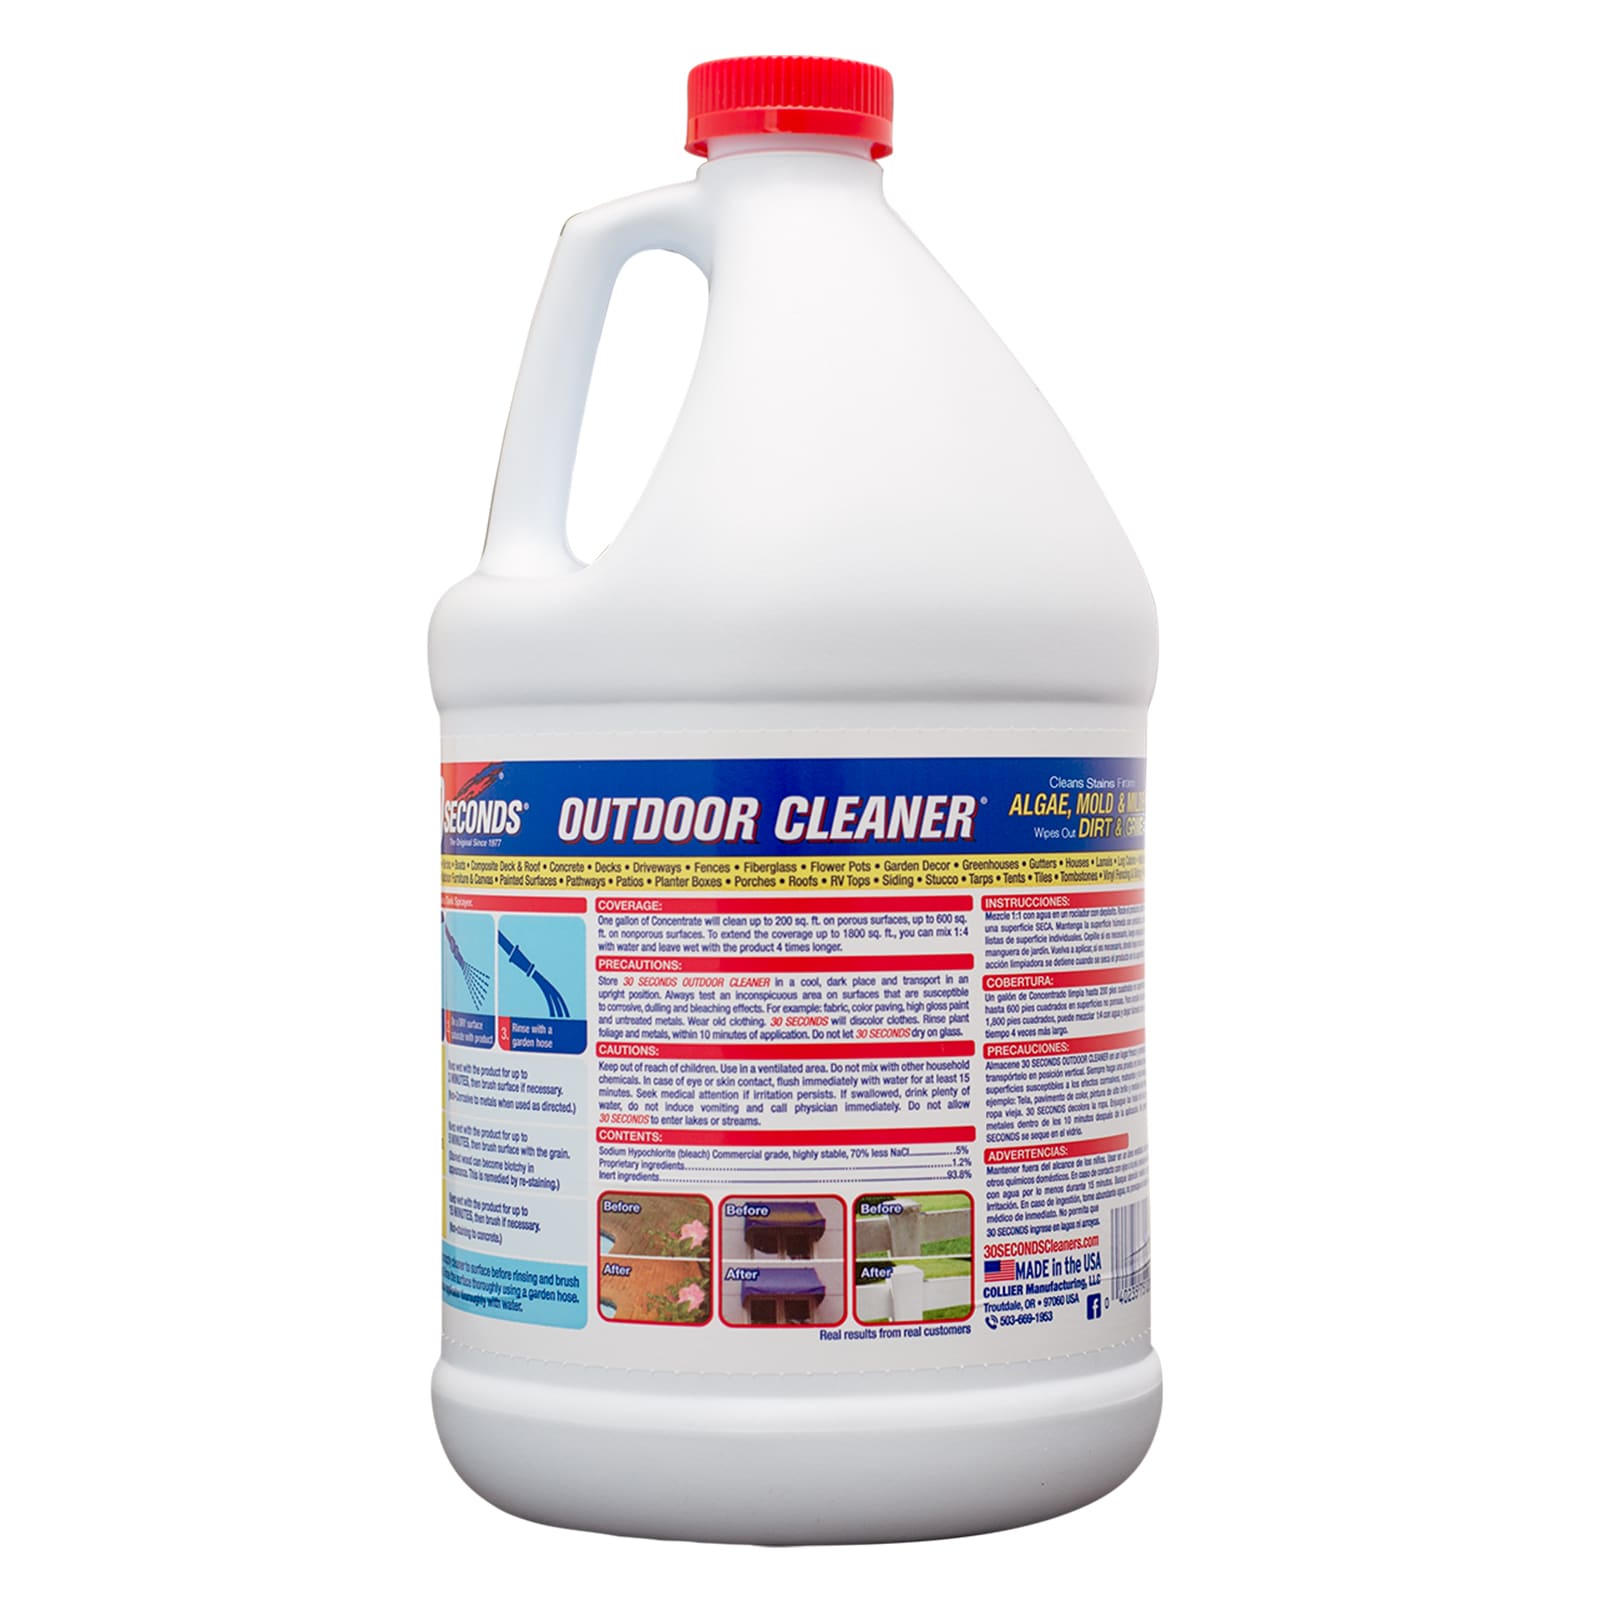 30 SECONDS Cleaners Outdoor Cleaner, 2.5 Gallon - Concentrate, White  (2.5G30S) : : Patio, Lawn & Garden